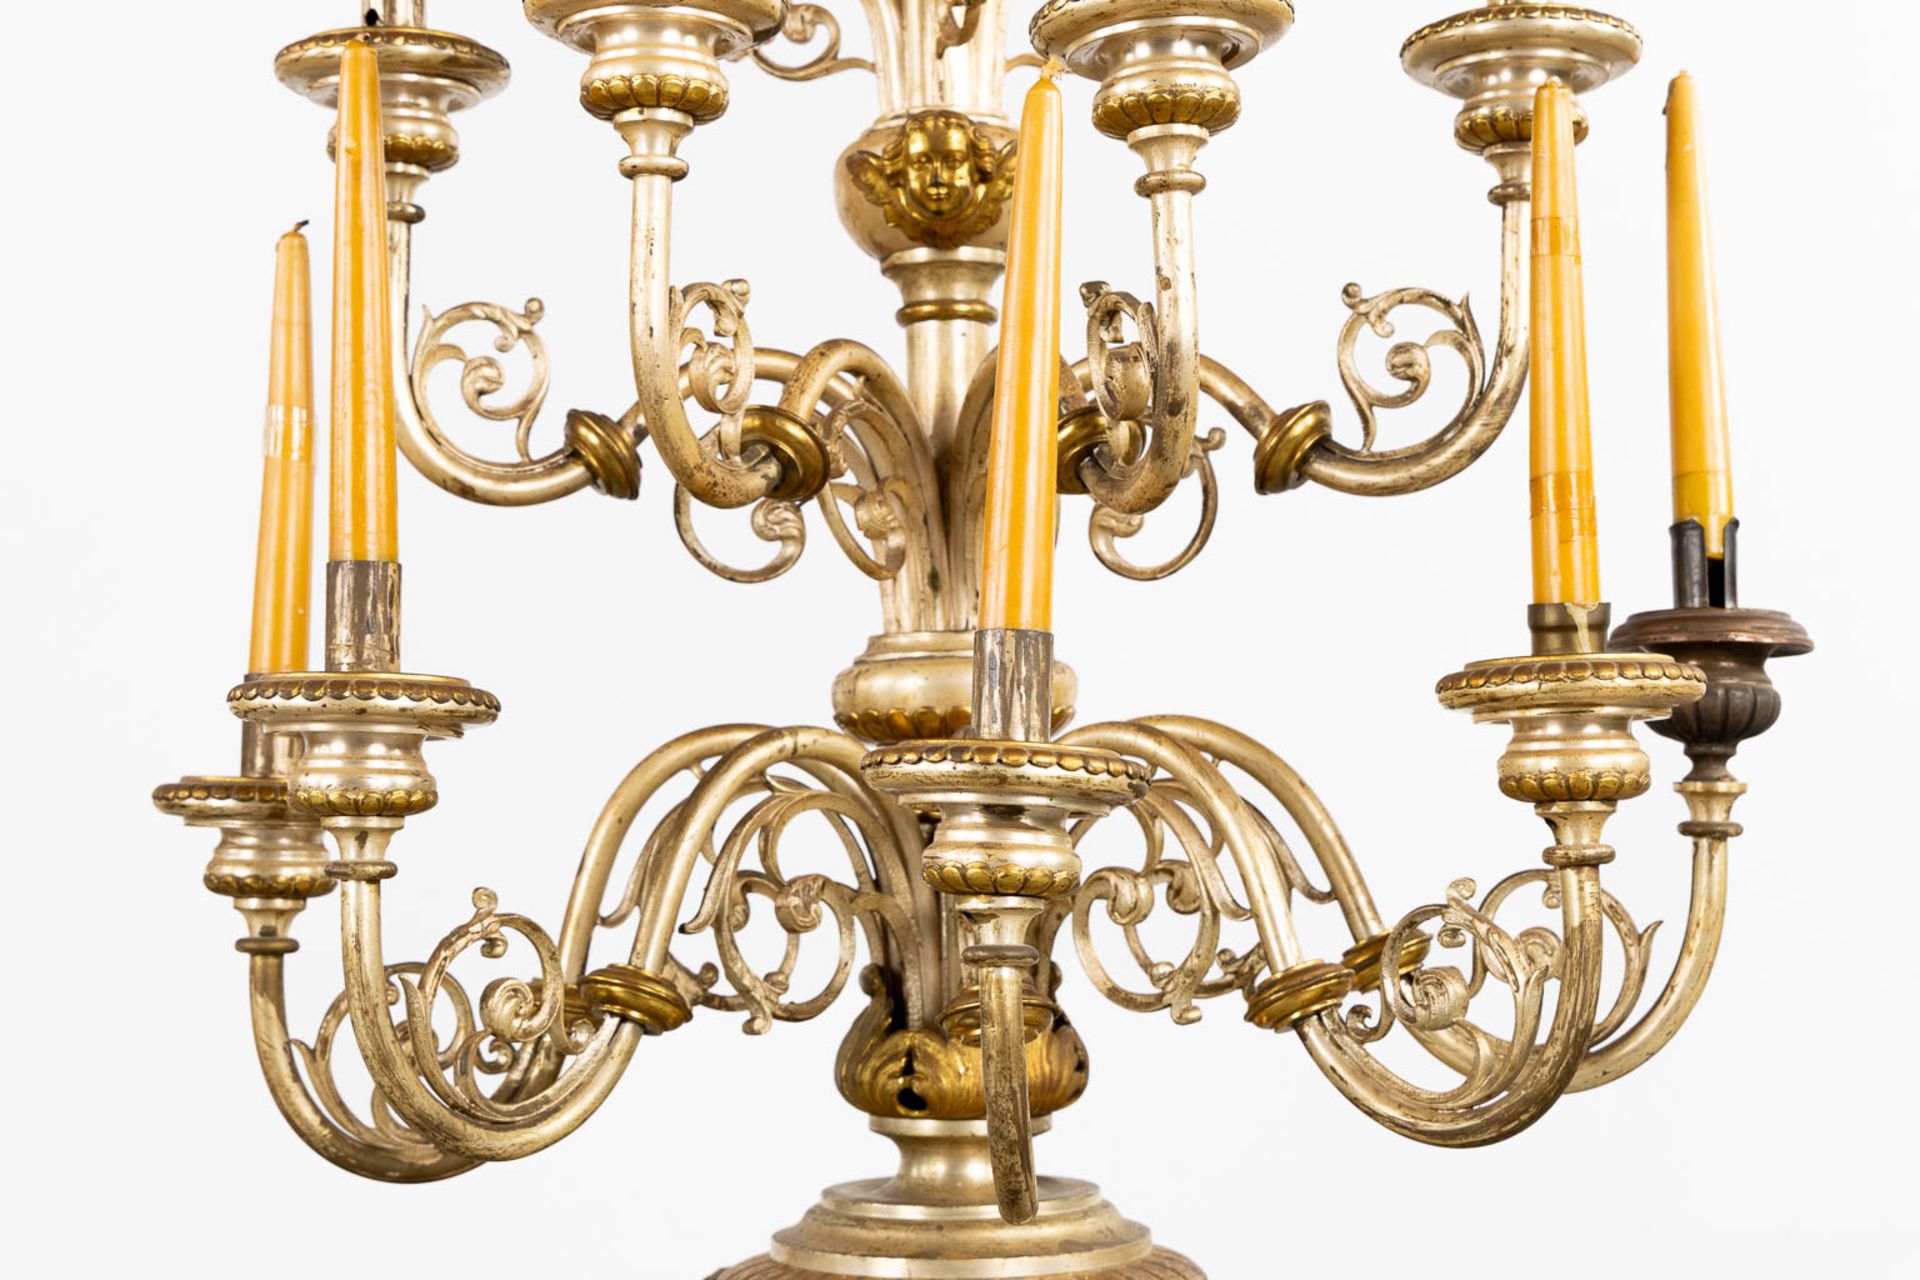 An impressive pair of candelabra, 15 candles, gold and silver-plated metal. (L:44 x W:60 x H:138 cm) - Bild 11 aus 12